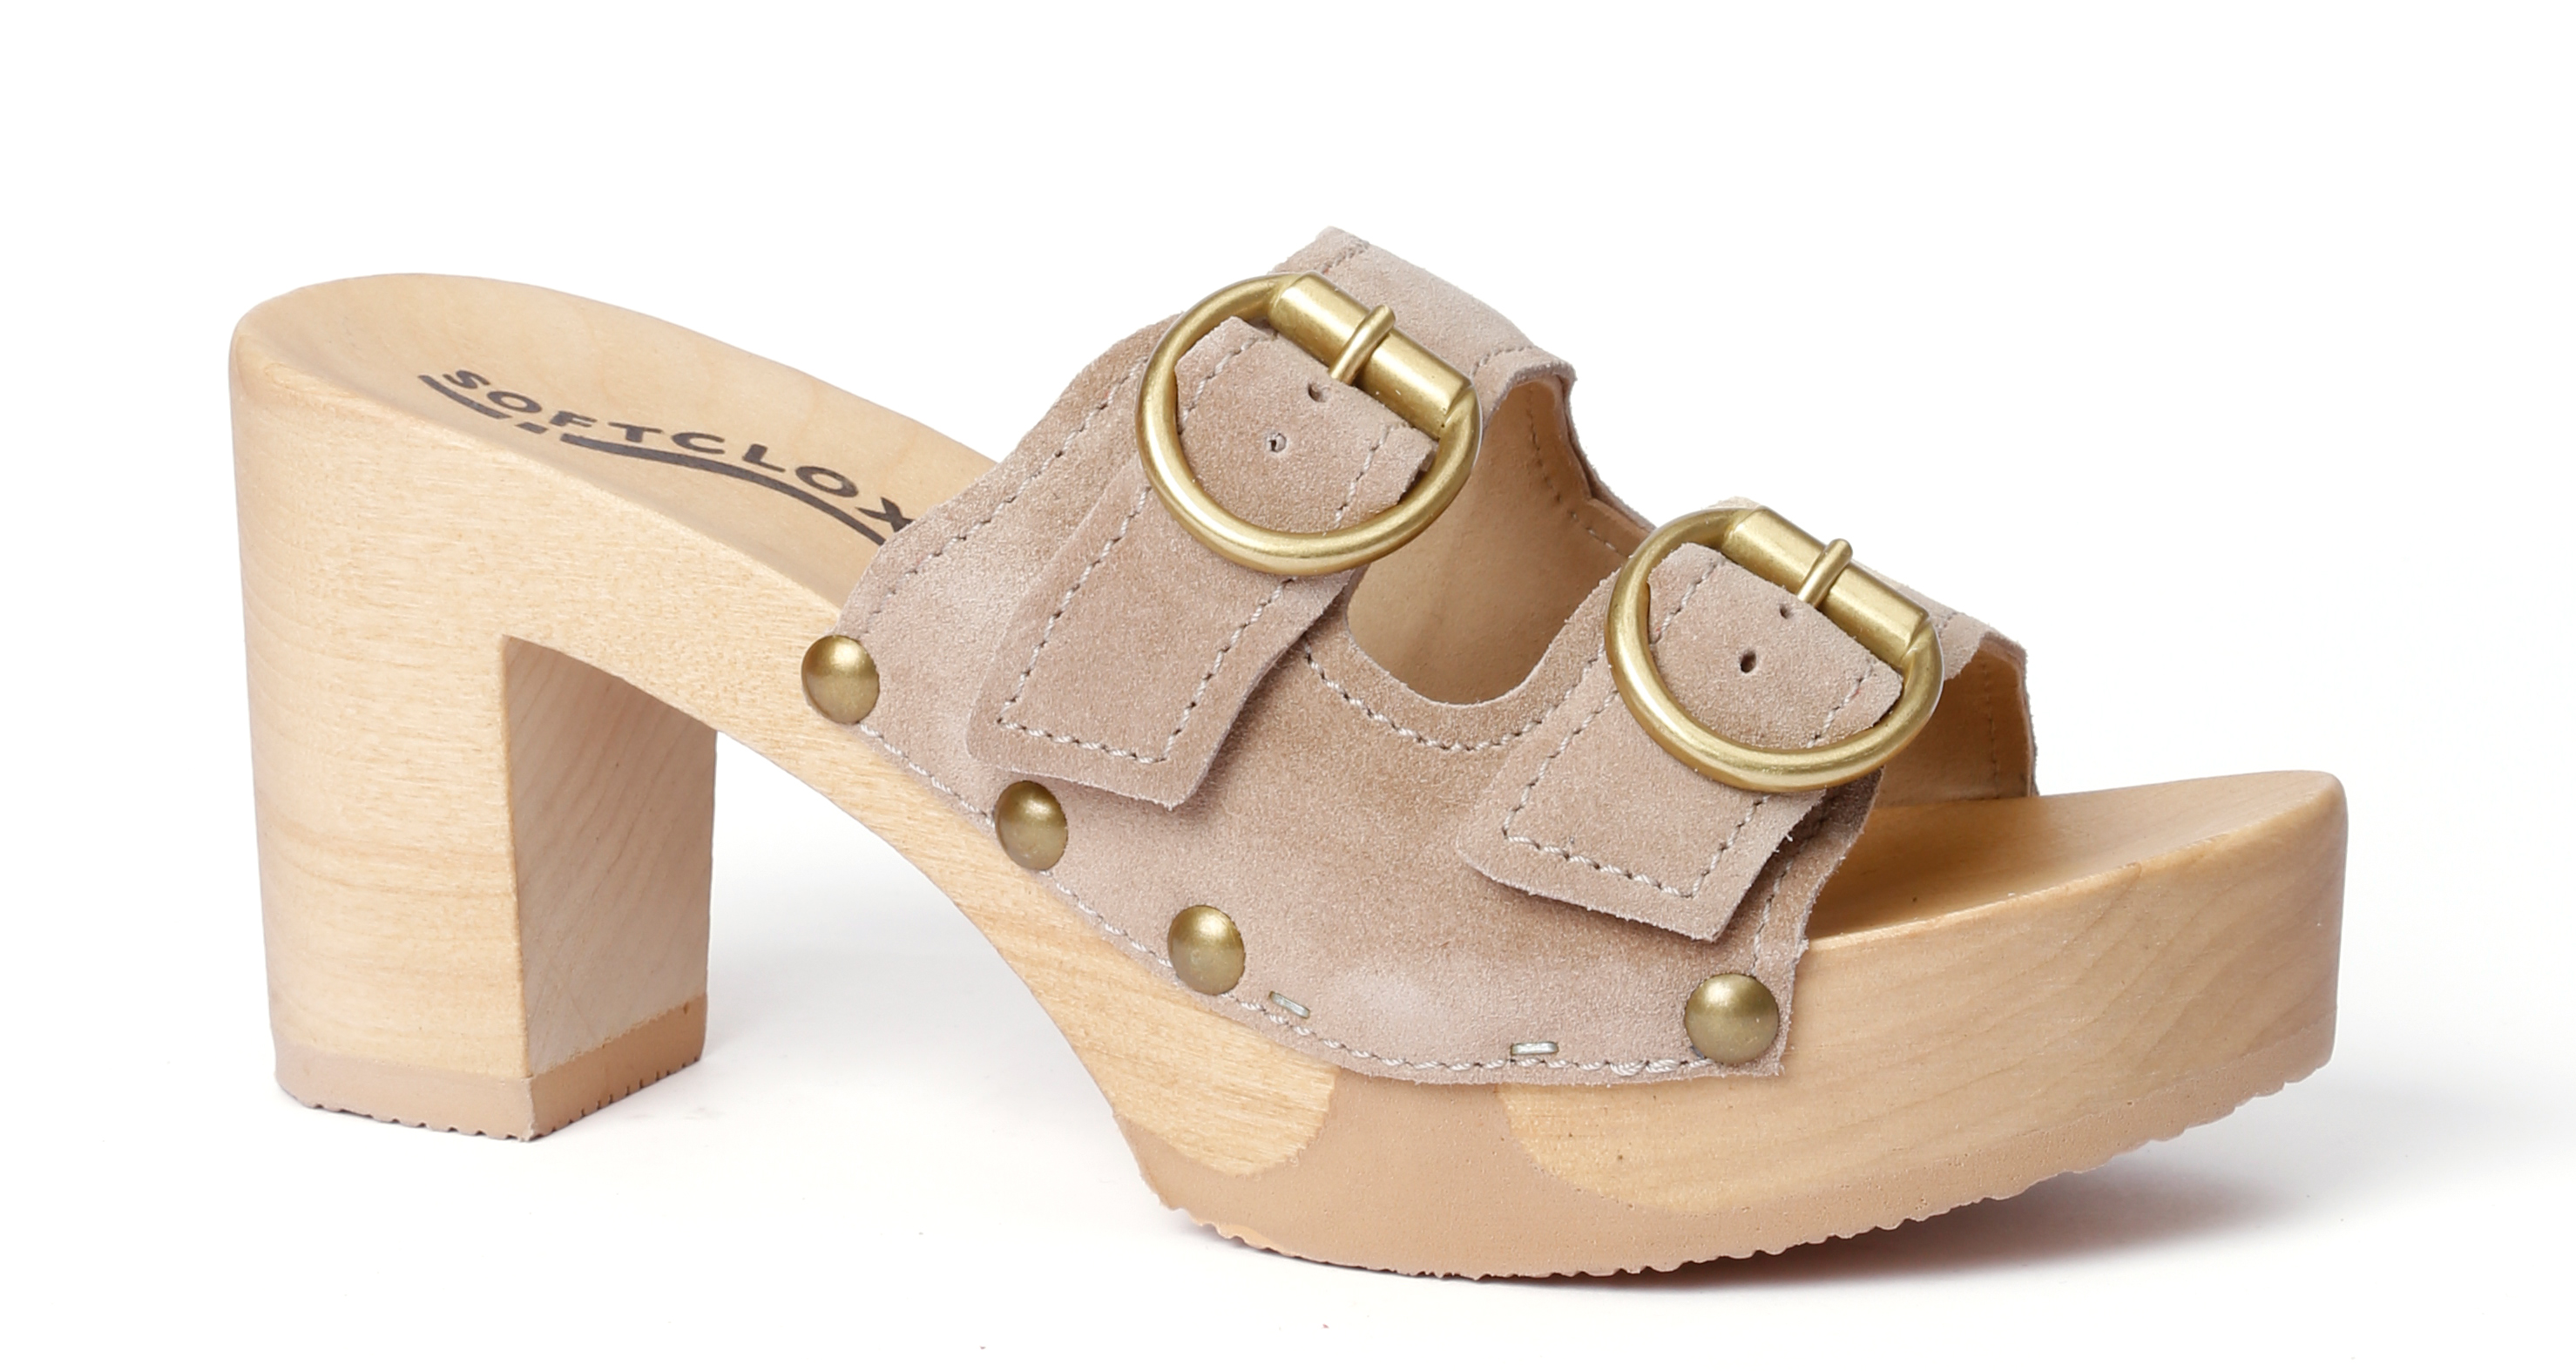 Shoe mule, made from poplar wood with smooth suede  in color taupe by Softclox